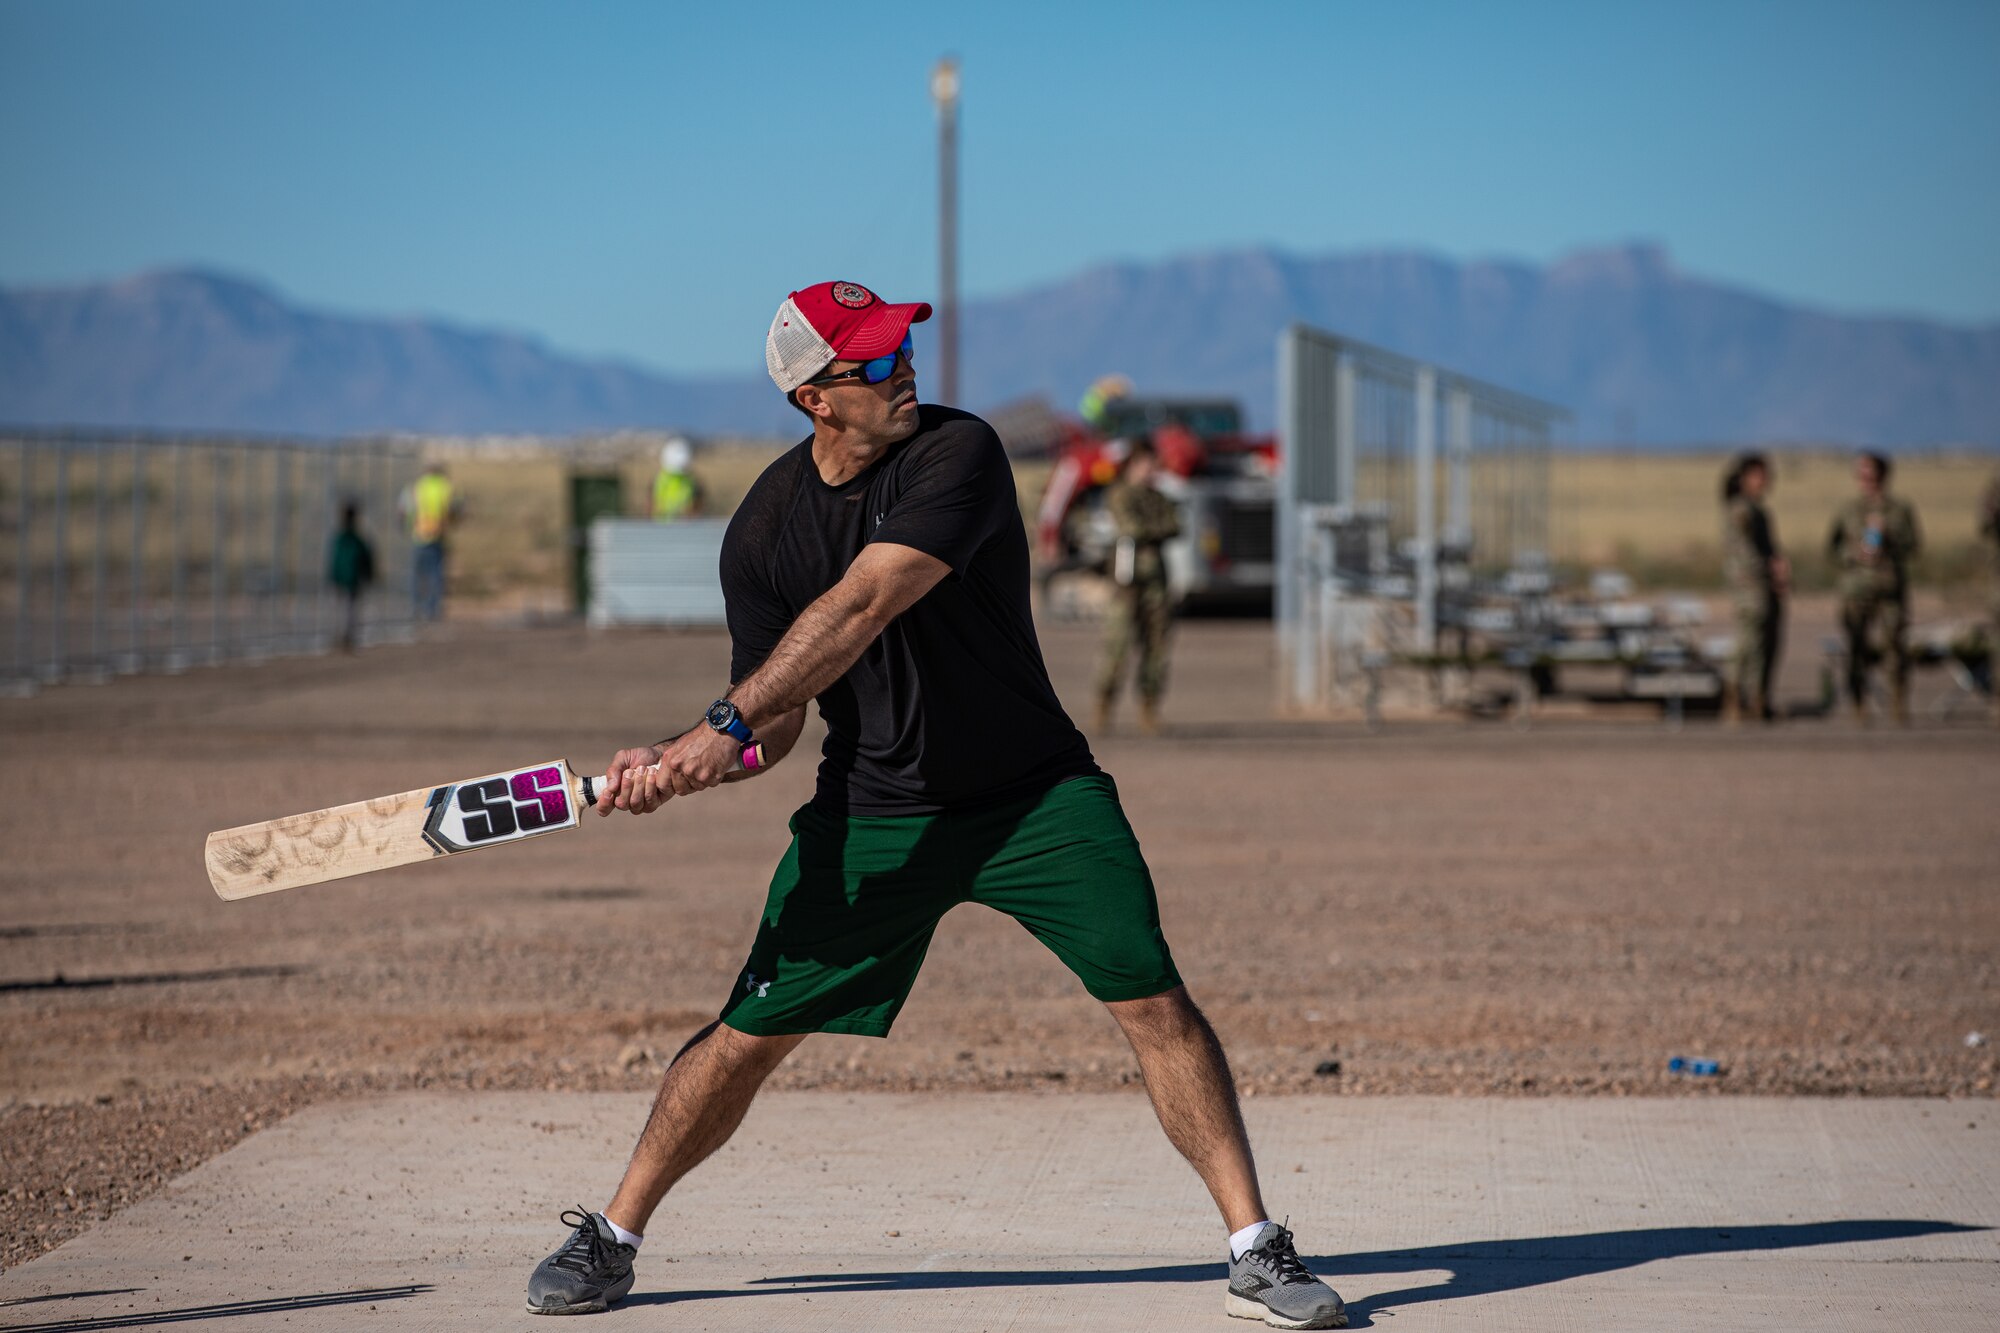 Lt. Col. Taylor Francis, Task Force-Holloman director of operations deployed from Seymour Johnson Air Force Base, North Carolina, bats during a cricket game between U.S. service members and Afghan evacuees at Aman Omid Village on Holloman Air Force Base, New Mexico, Oct. 9, 2021. The Department of Defense, through U.S. Northern Command, and in support of the Department of Homeland Security, is providing transportation, temporary housing, medical screening, and general support for at least 50,000 Afghan evacuees at suitable facilities, in permanent or temporary structures, as quickly as possible. This initiative provides Afghan personnel essential support at secure locations outside Afghanistan. (U.S. Army photo by Pfc. Anthony Sanchez)